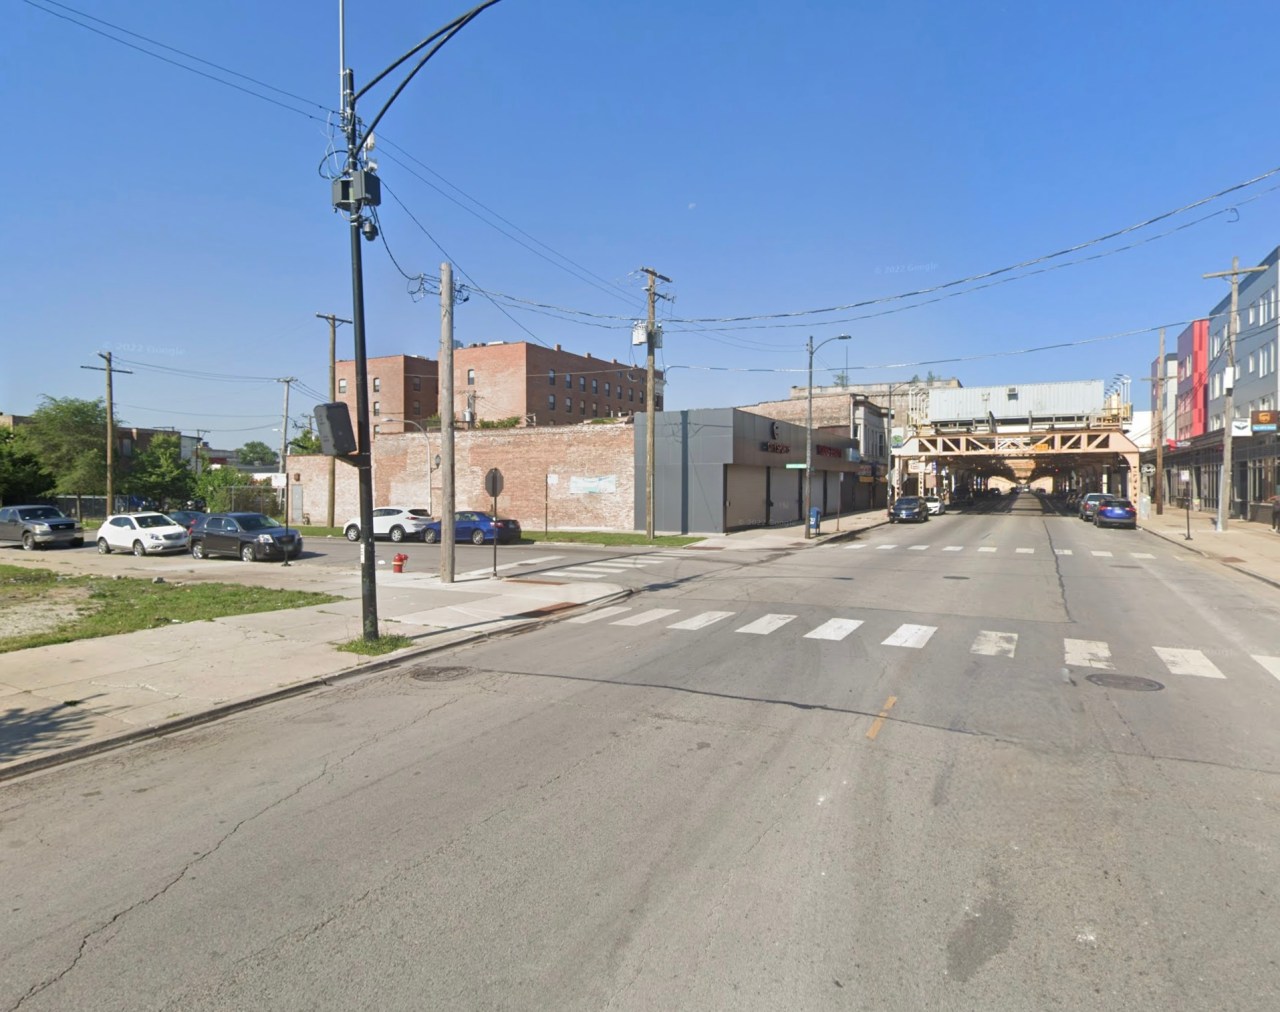 Looking west from the vacant lot (left) towards the Cottage Grove Green Line station. Image: Google Maps